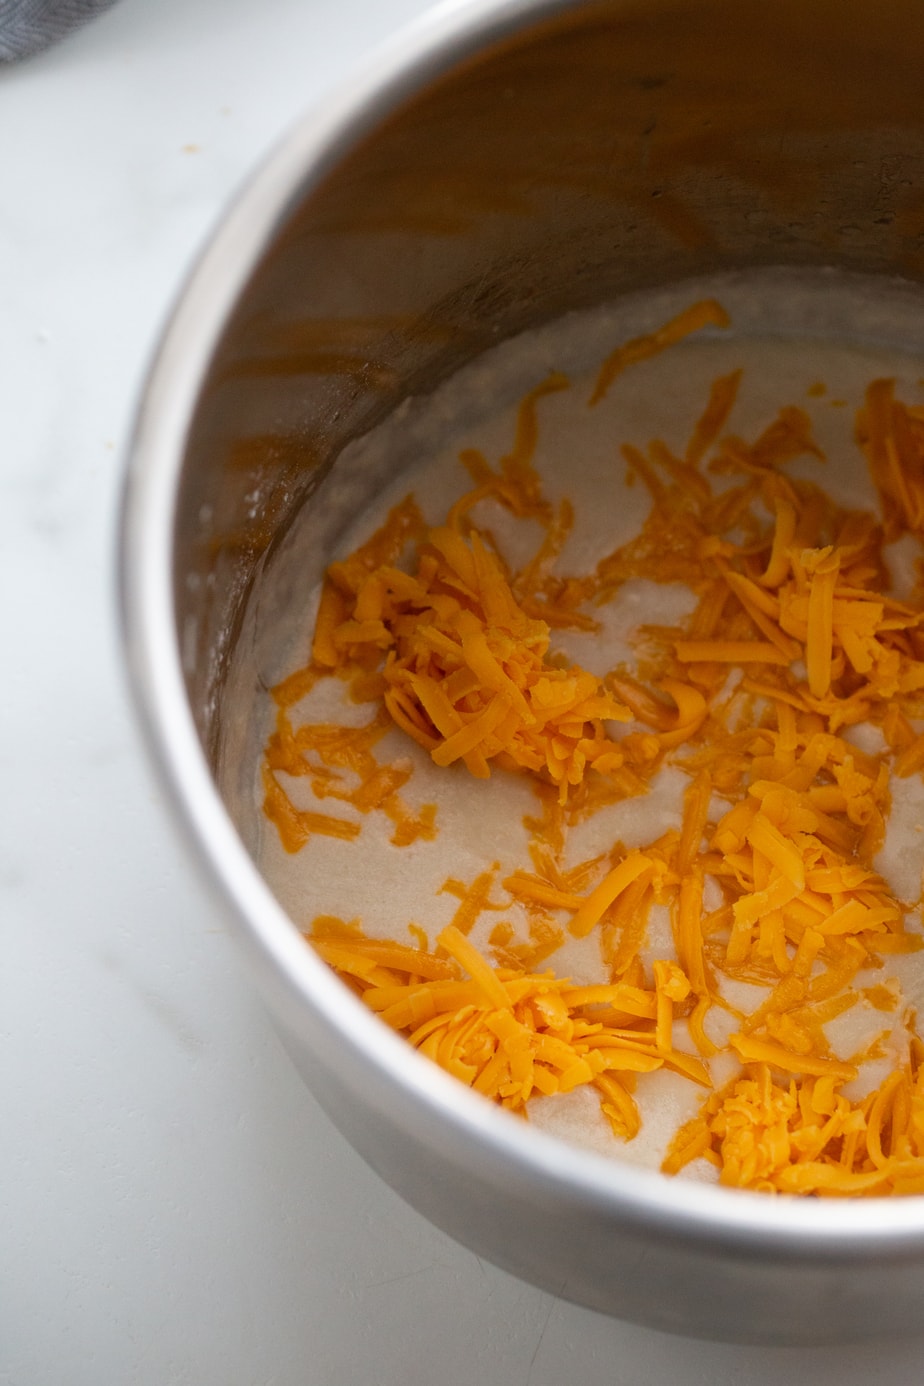 Shredded yellow cheddar cheese is in a pot.